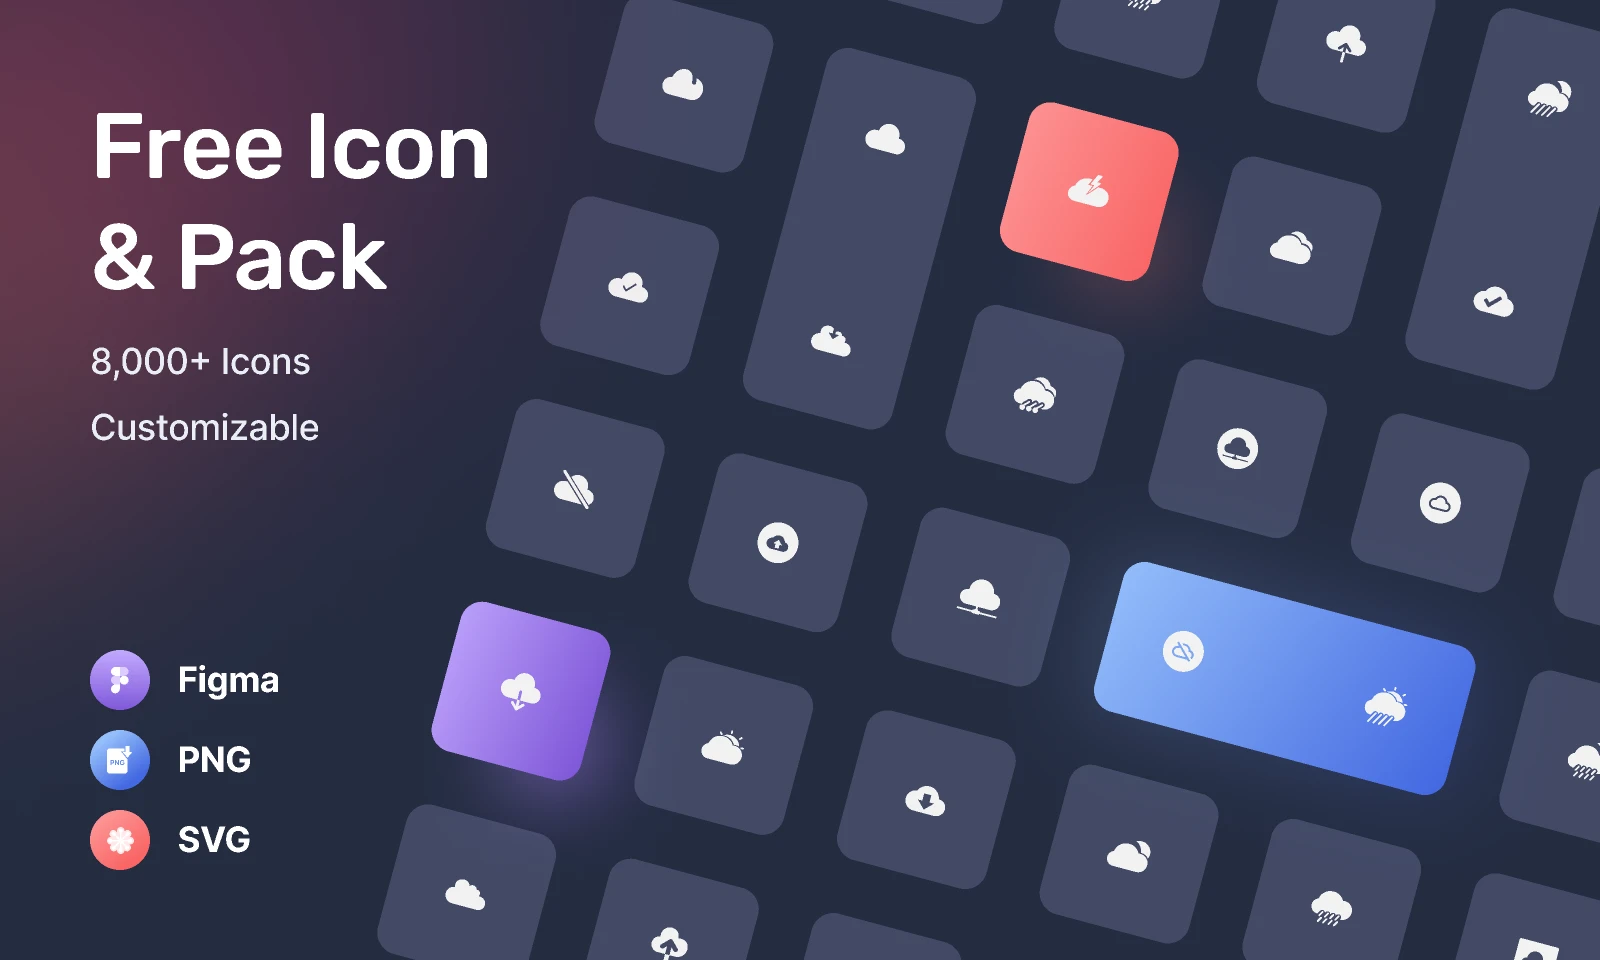 Free Icon & Pack for Figma and Adobe XD